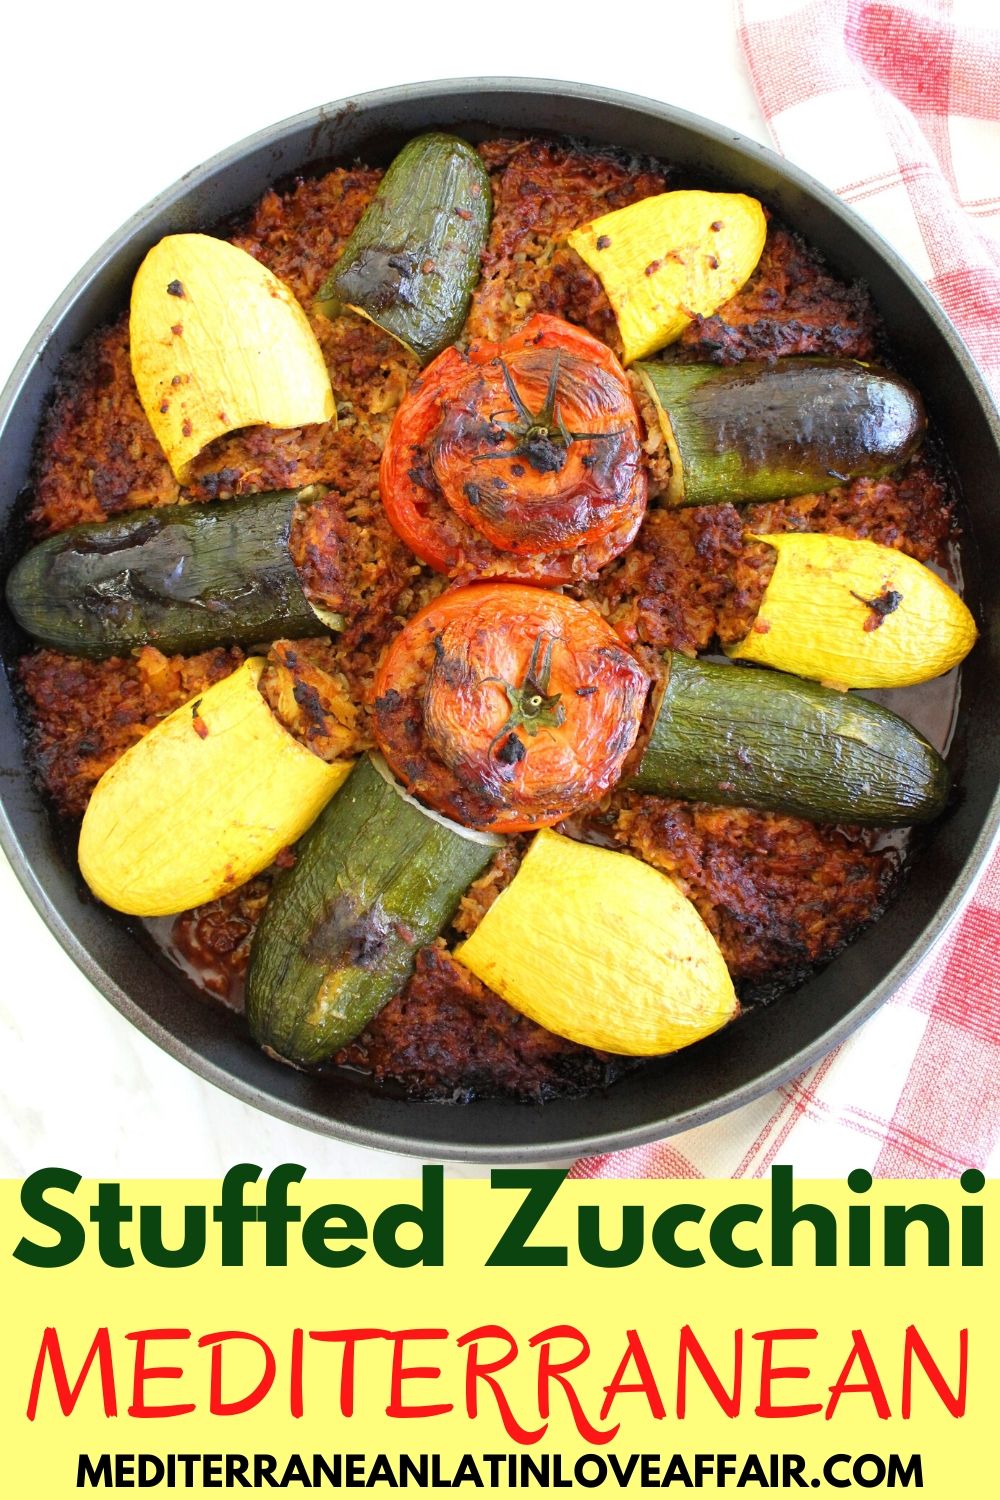 A Baked casseroles with stuffed vegetables like zucchini, yellow squash and tomatoes. The image is prepared for Pinterest showing the title under the picture so readers can pin it. 